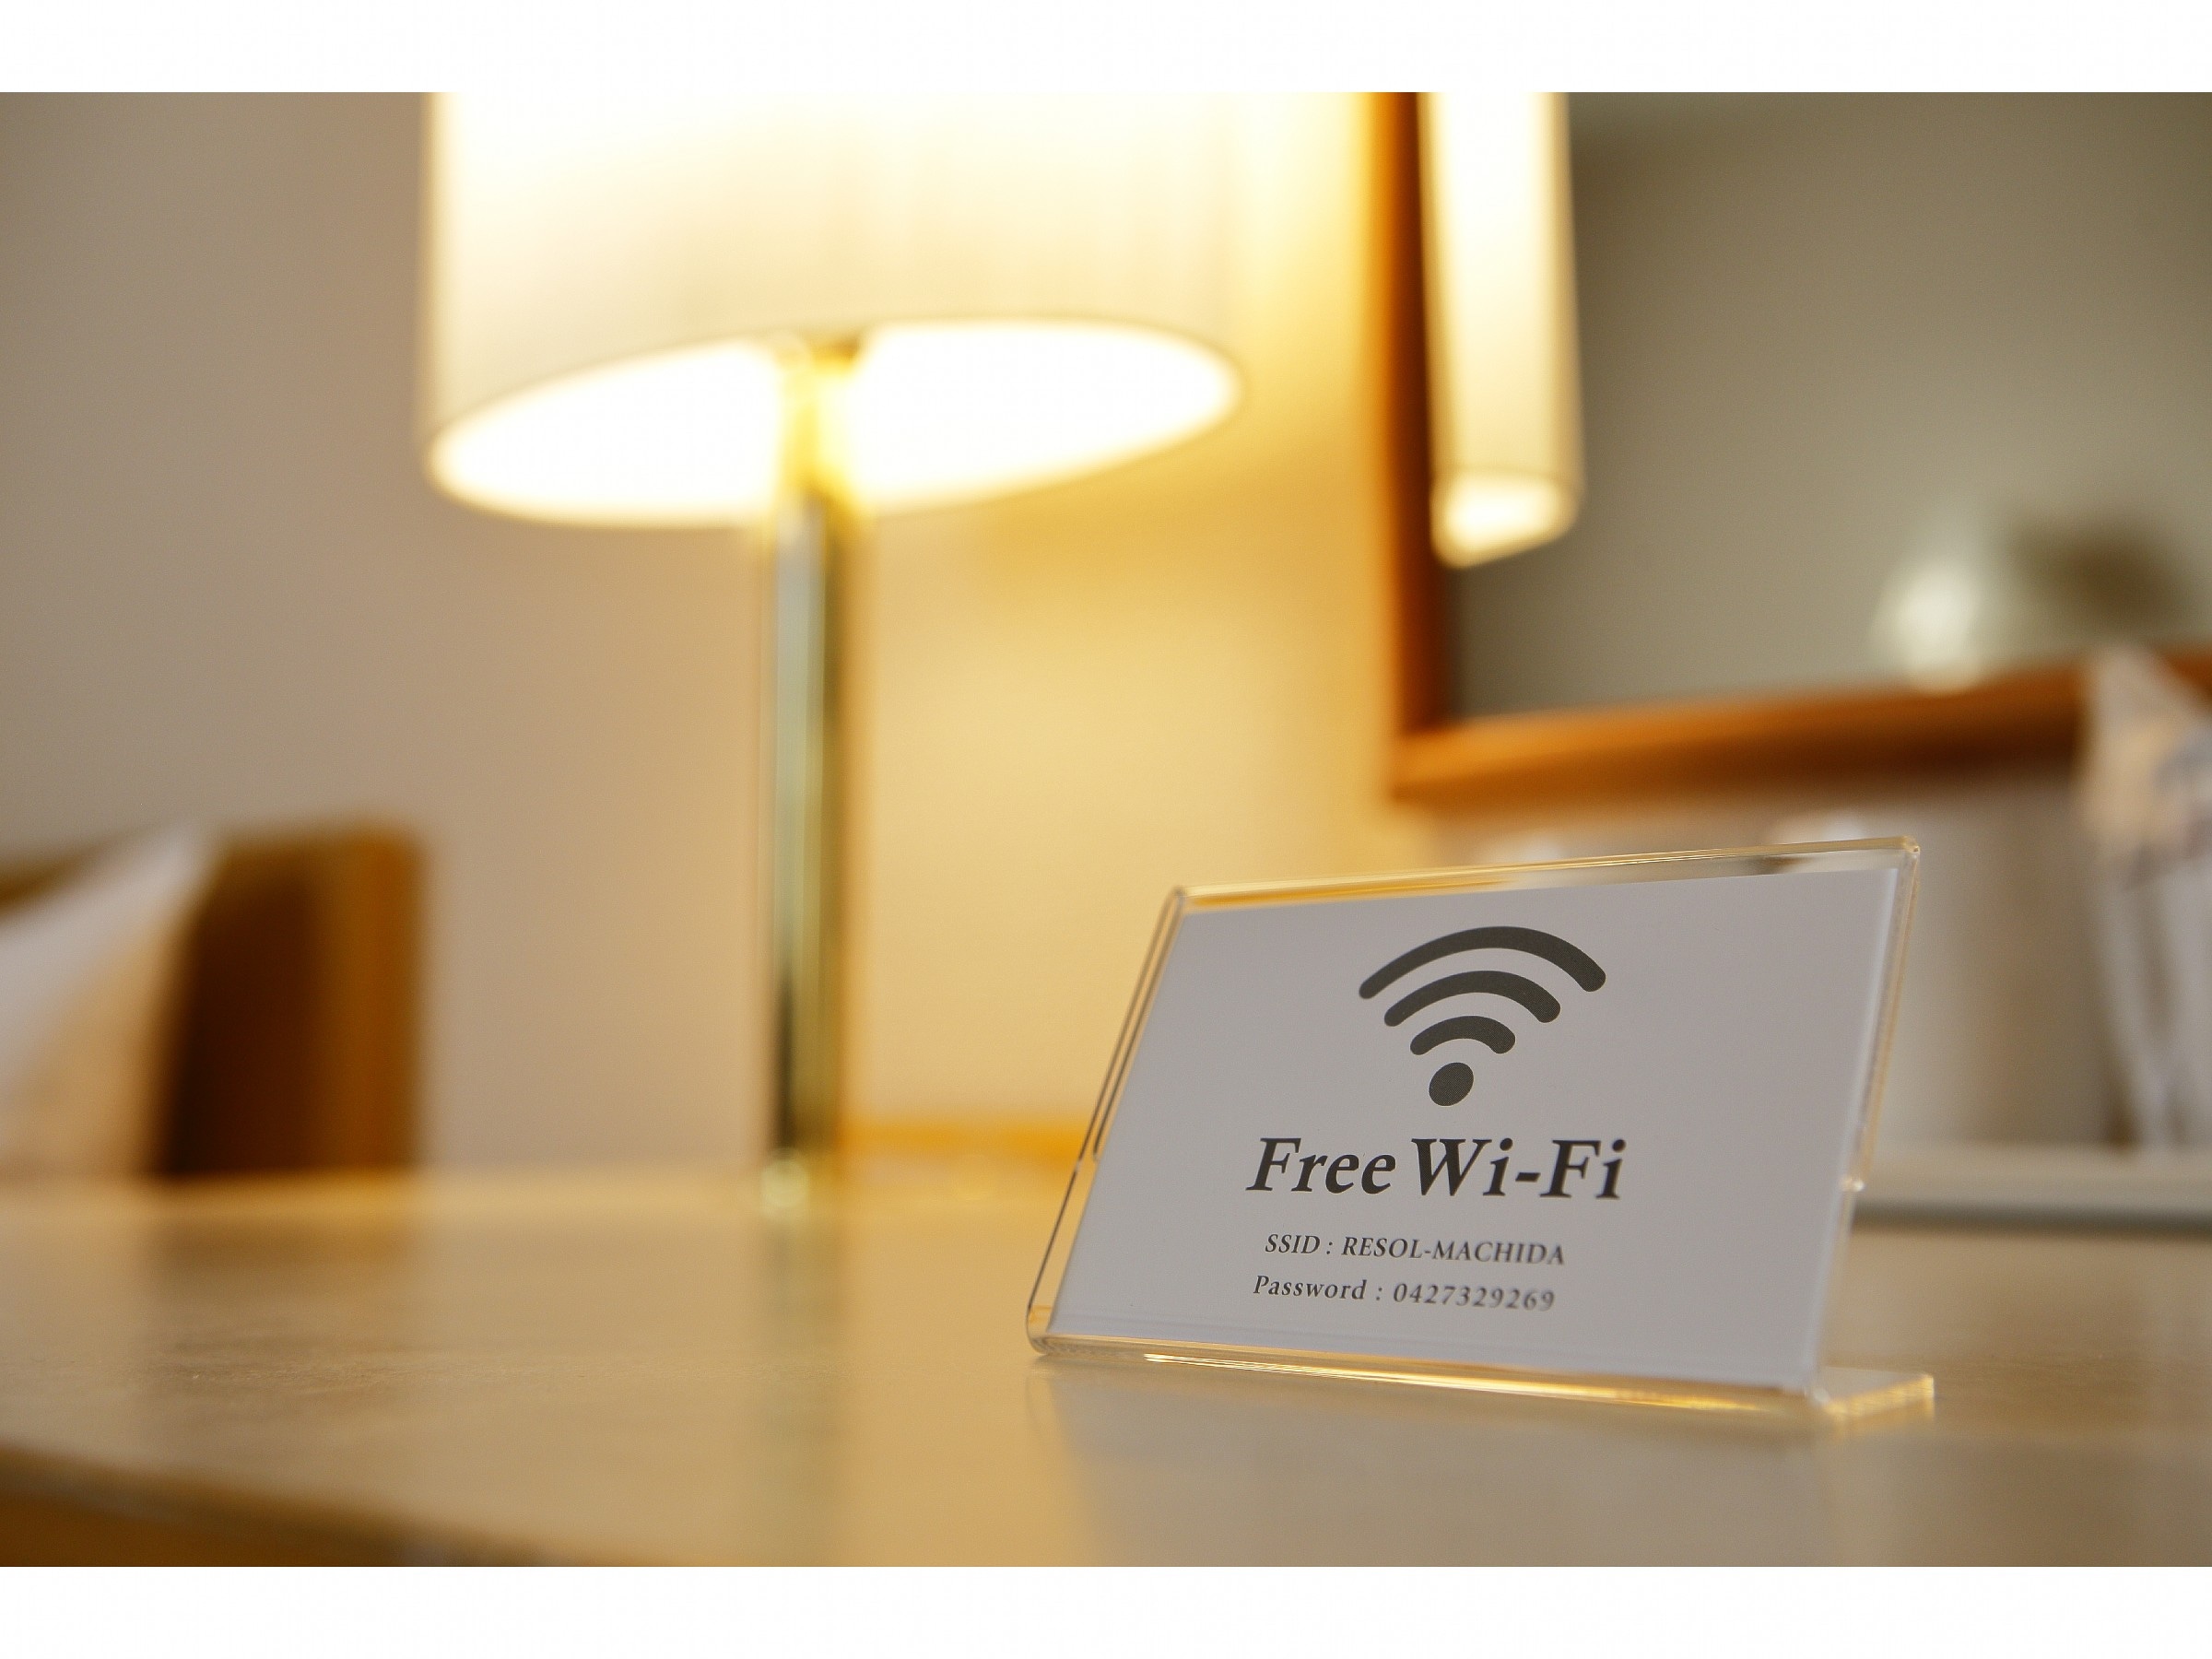 Wi-Fi is available in all rooms